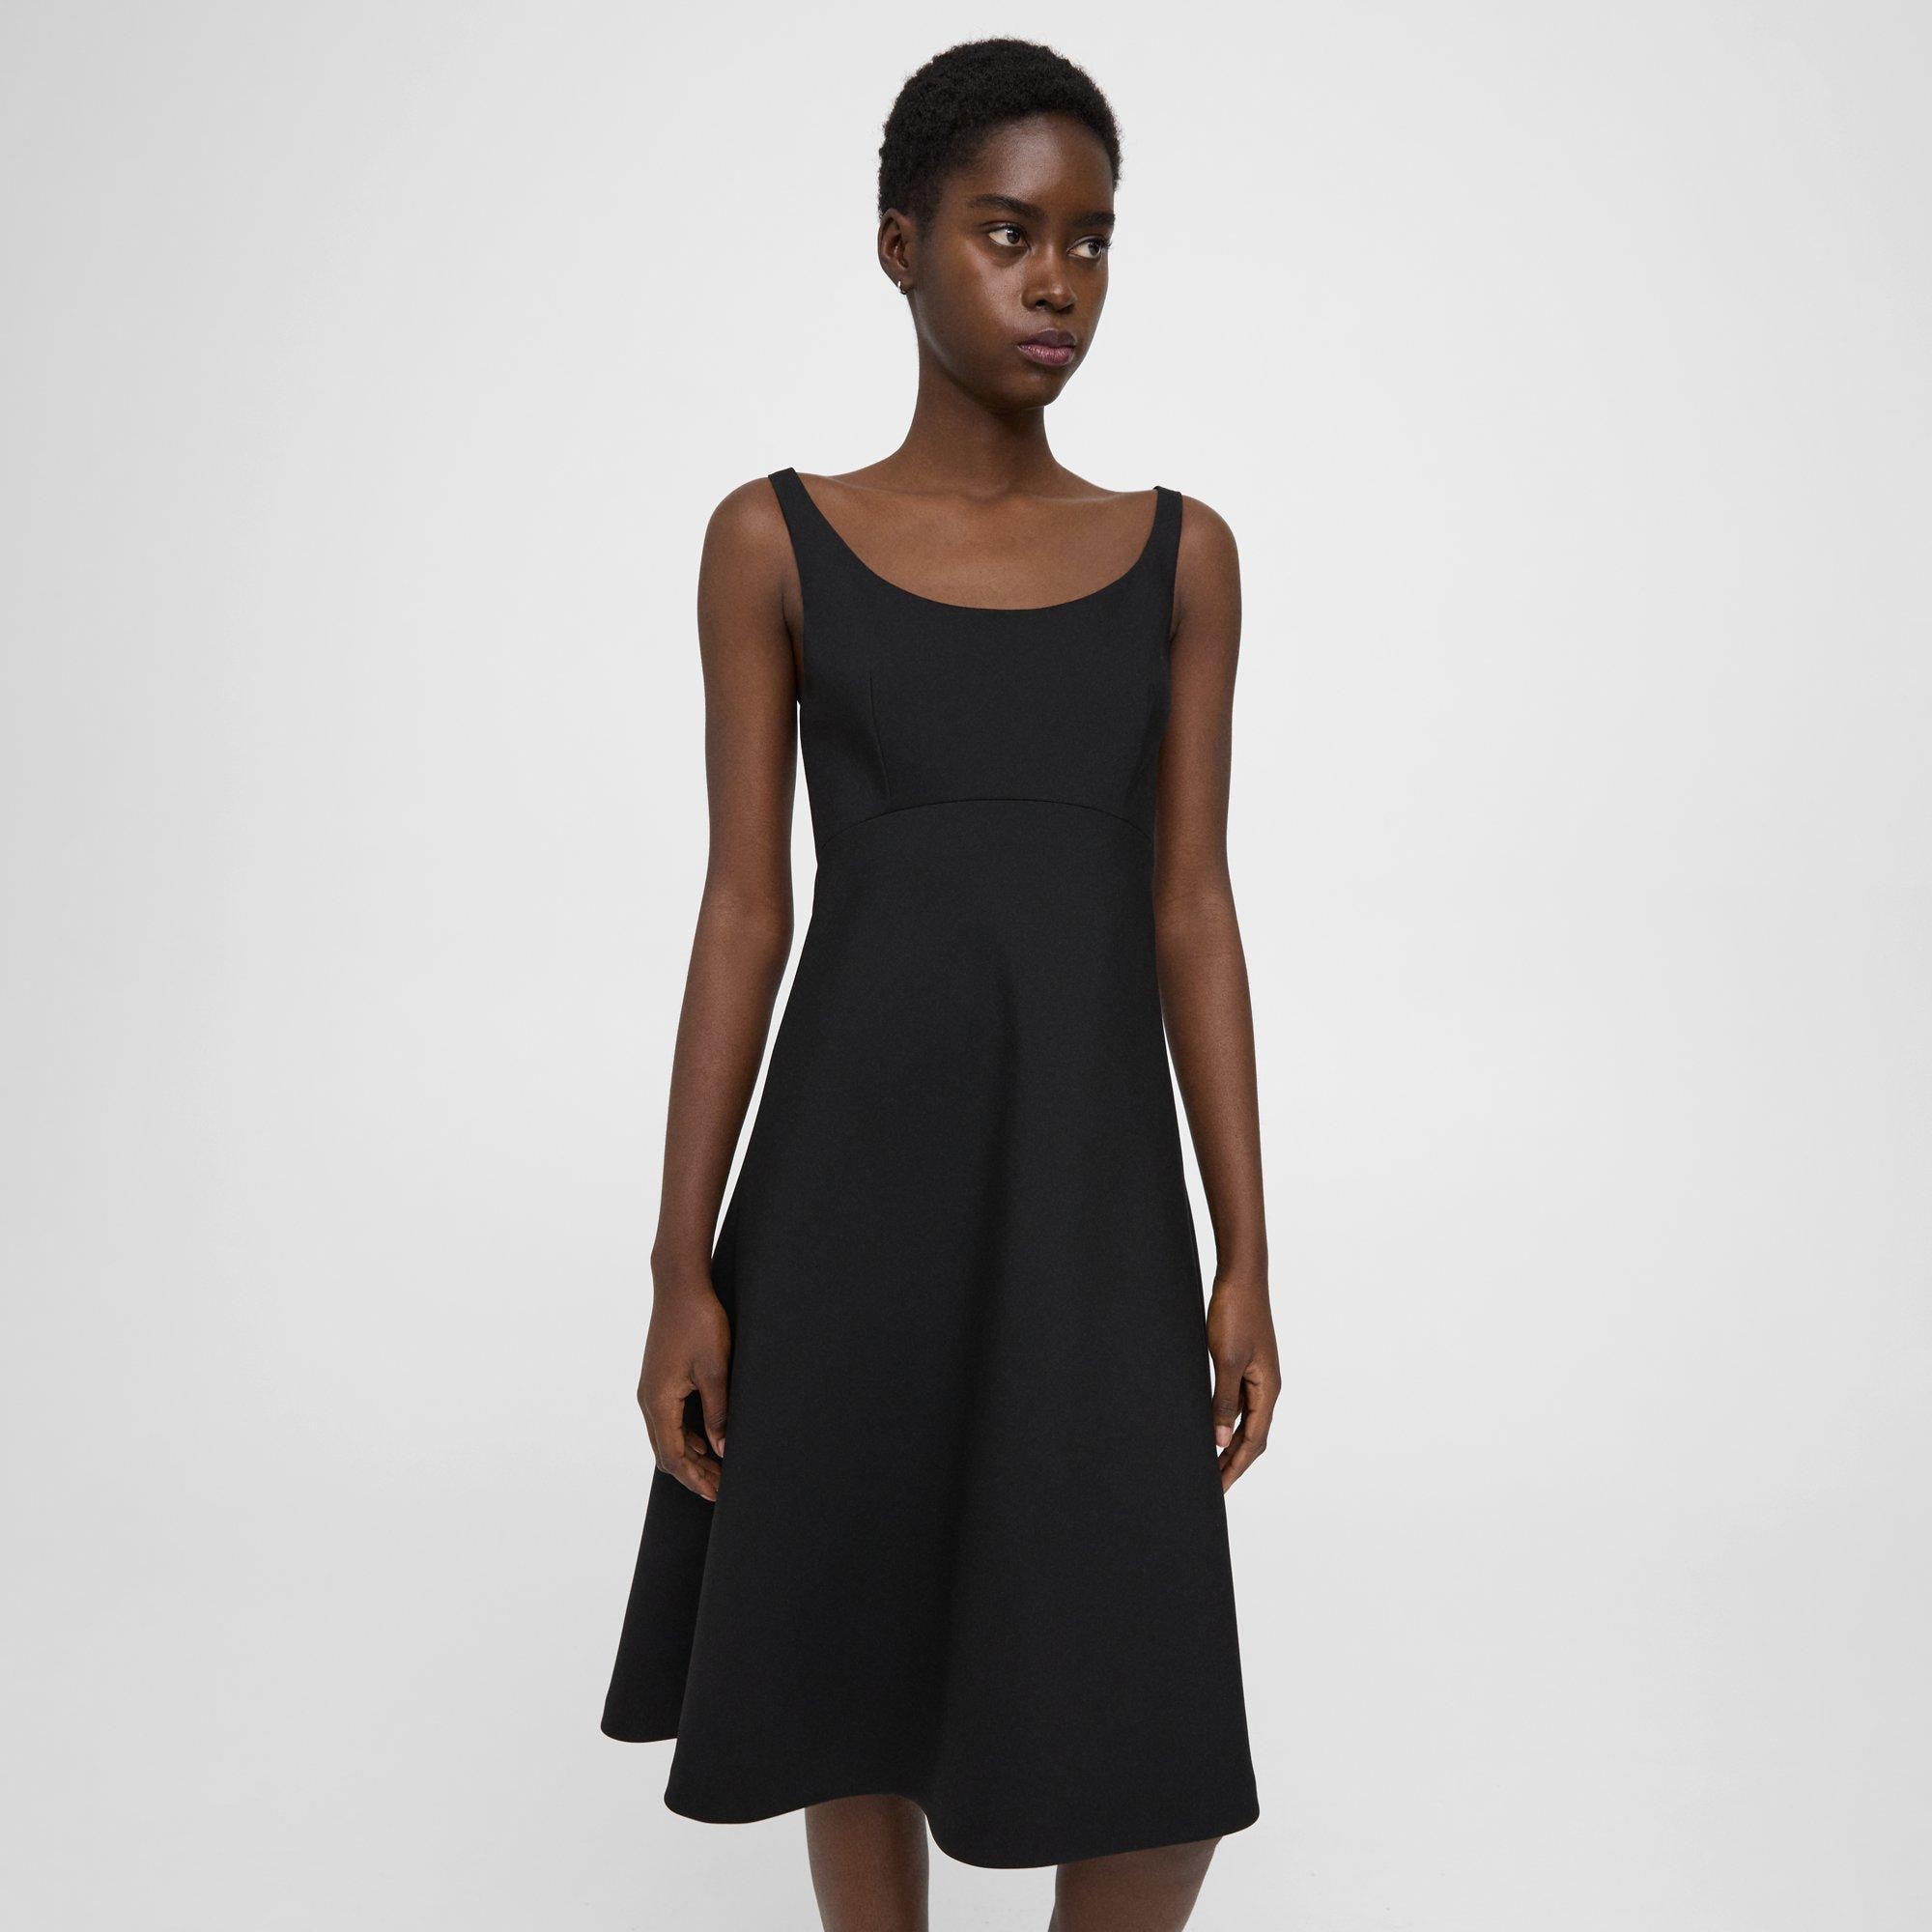 Women's Clothing | Theory UK Official Site